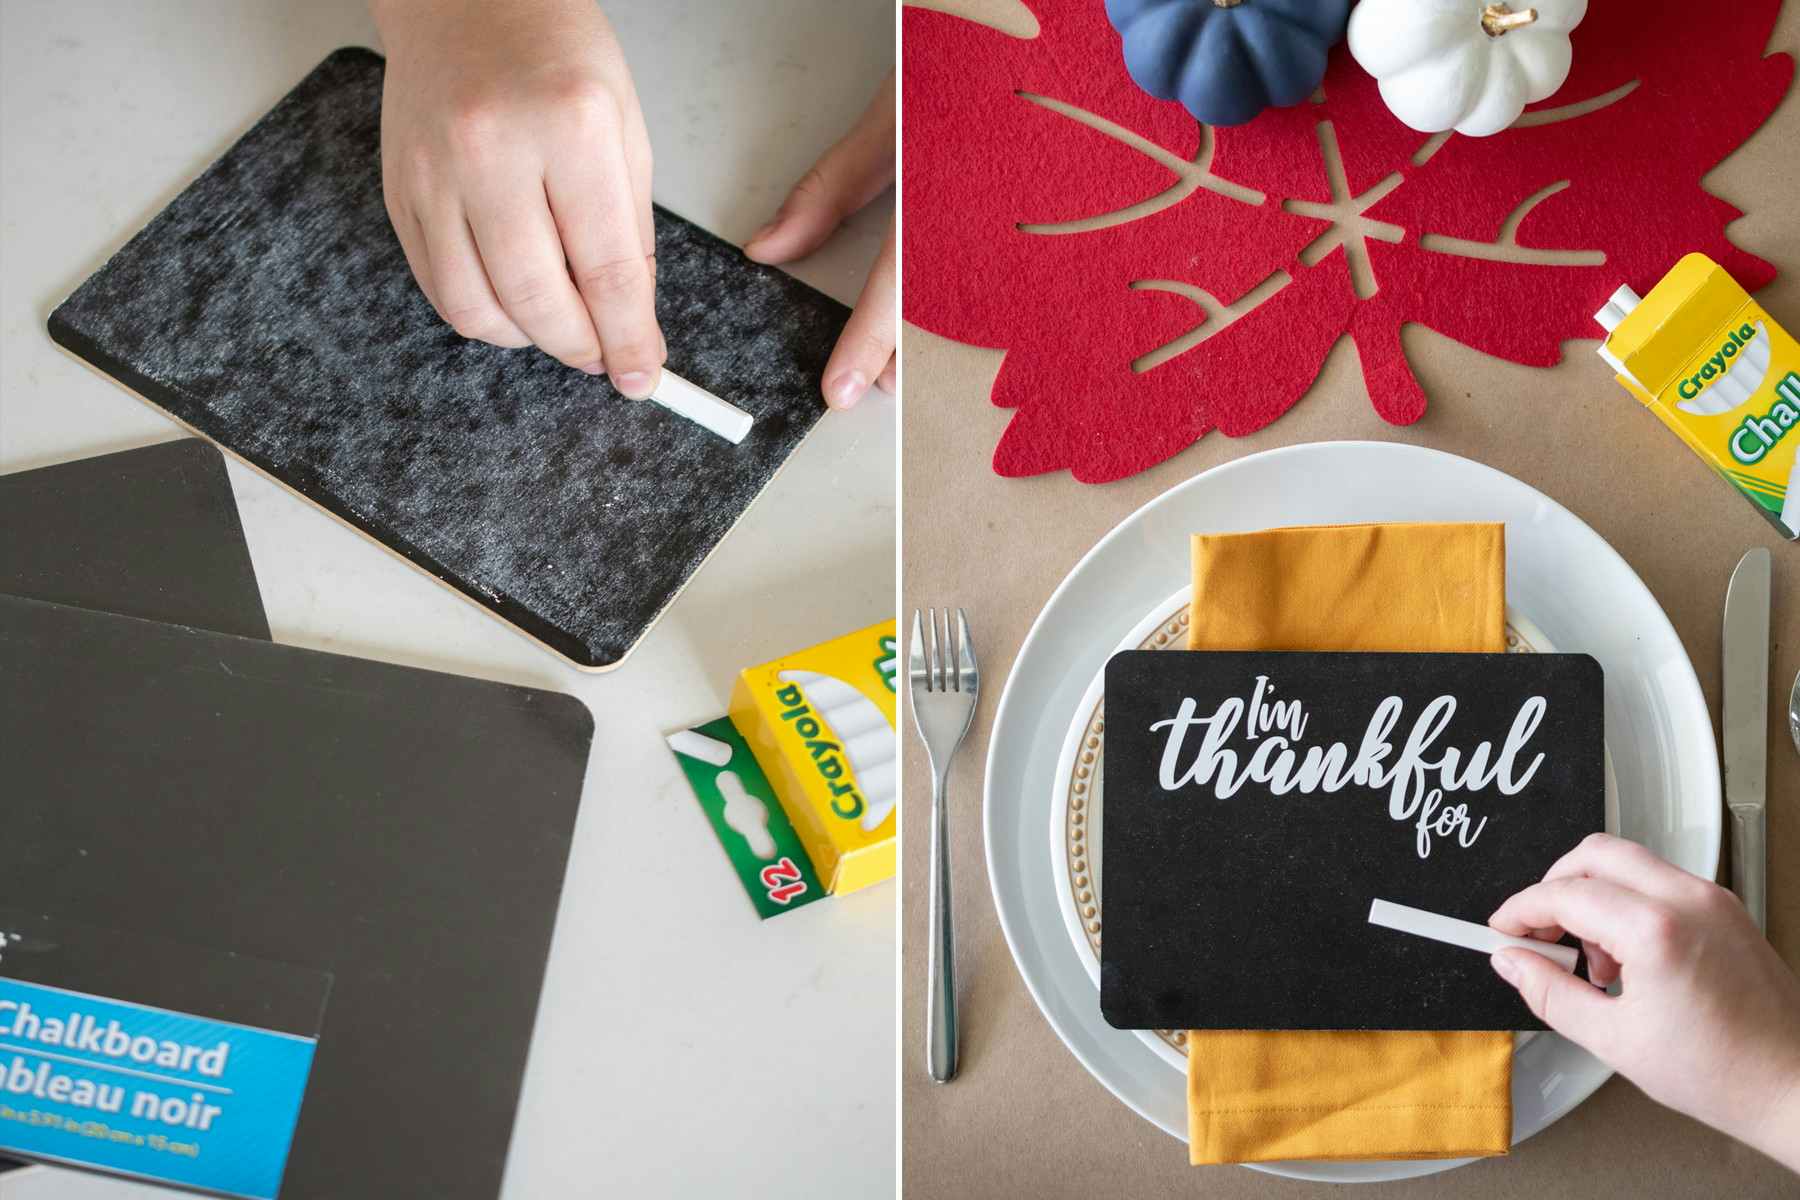 A thanksgiving chalk board with the words "I am thankful for" sitting on a plate and yellow napkin. 